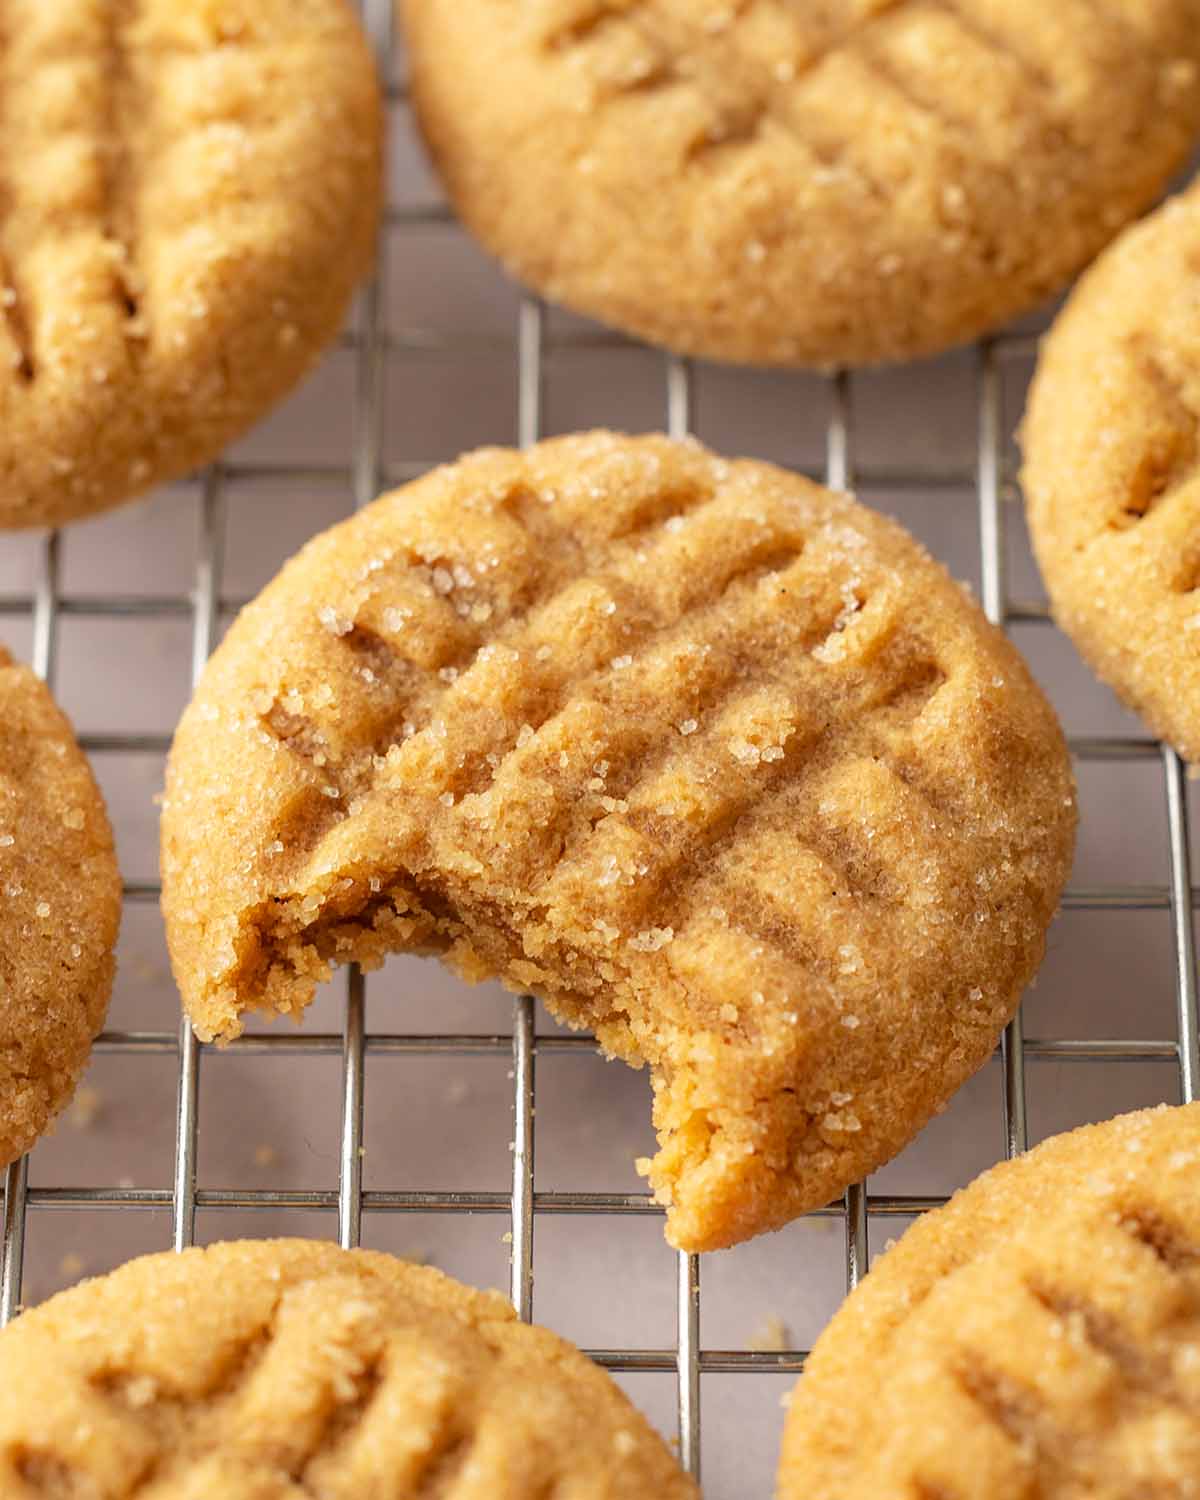 Close up of peanut butter cookie with bite taken out showing soft chewy interior.